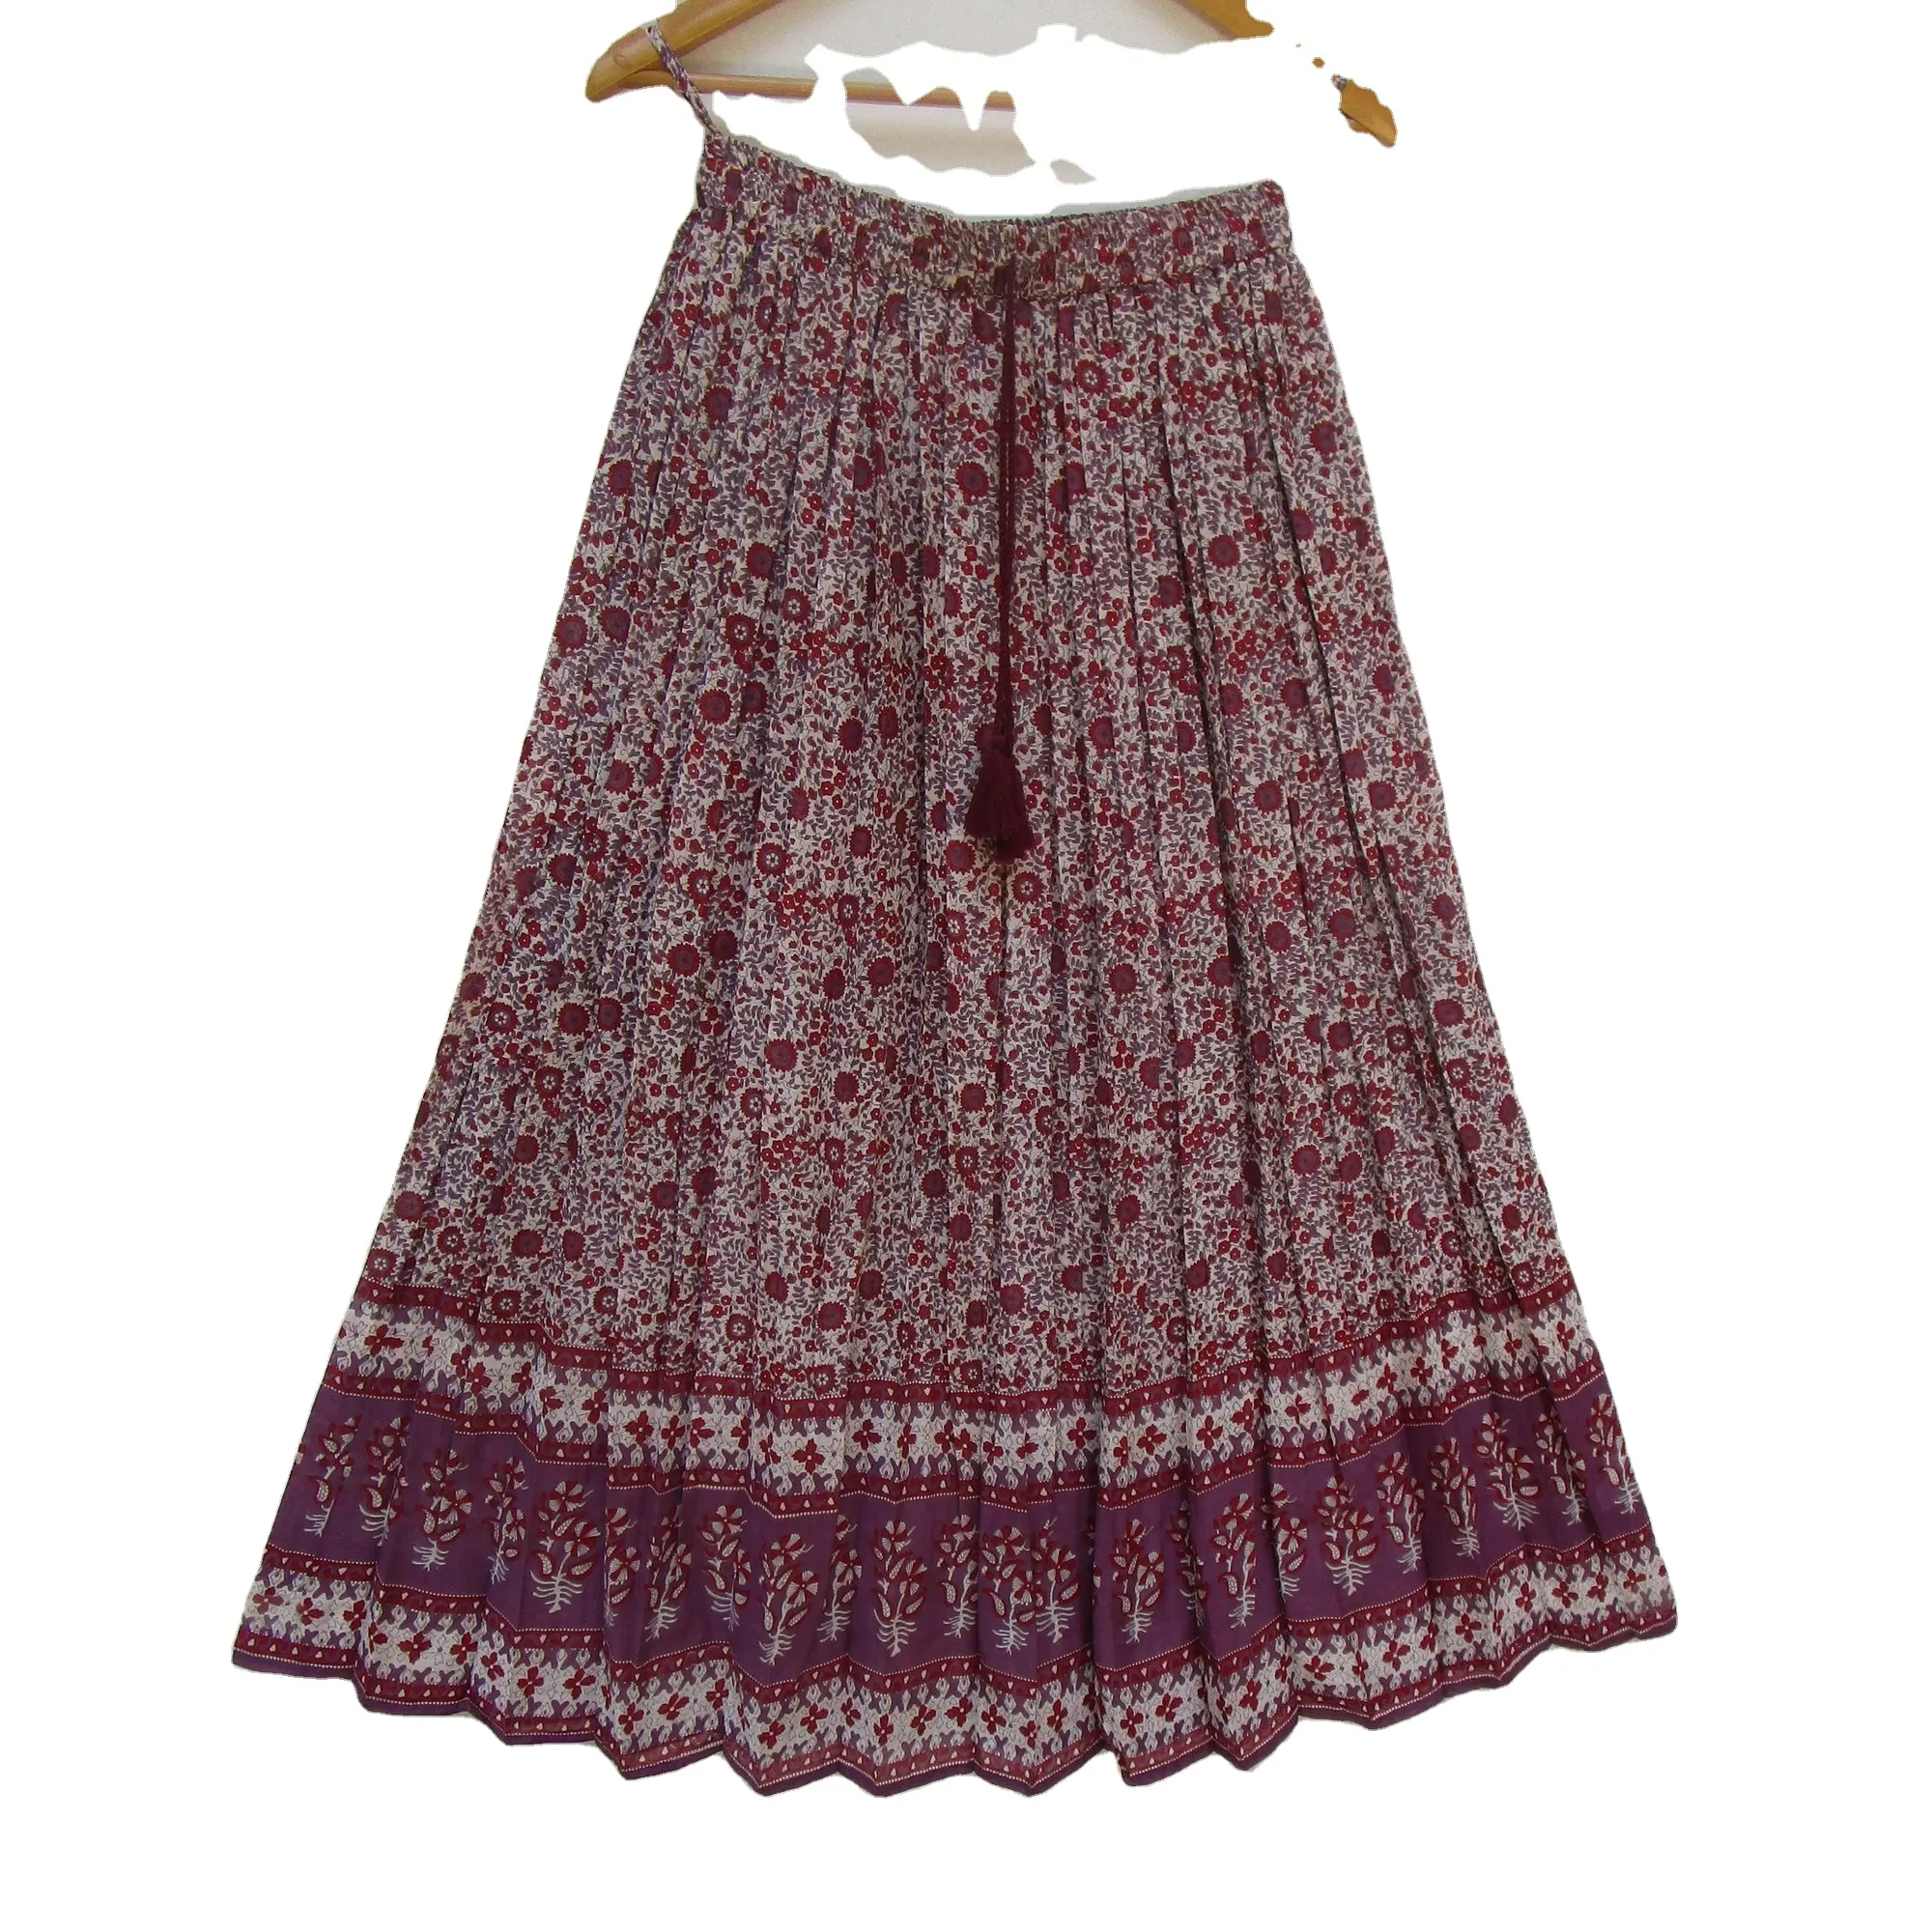 Cotton bohemian look long vintage maxi skirts - broomstick style maxi skirts - summer wear skirts